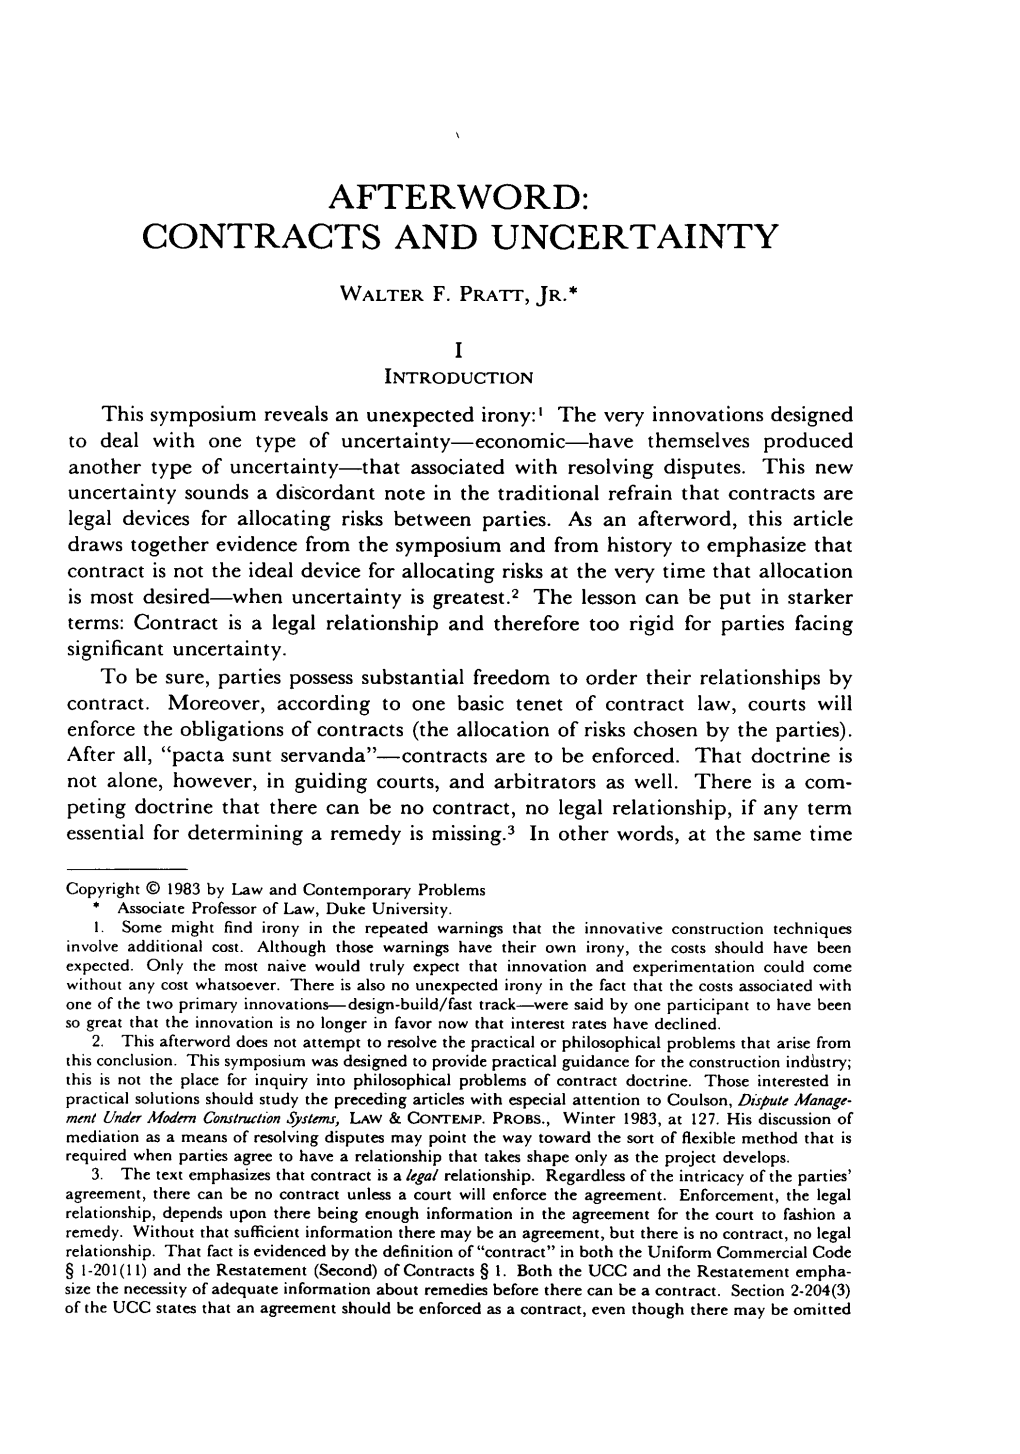 Contracts and Uncertainty